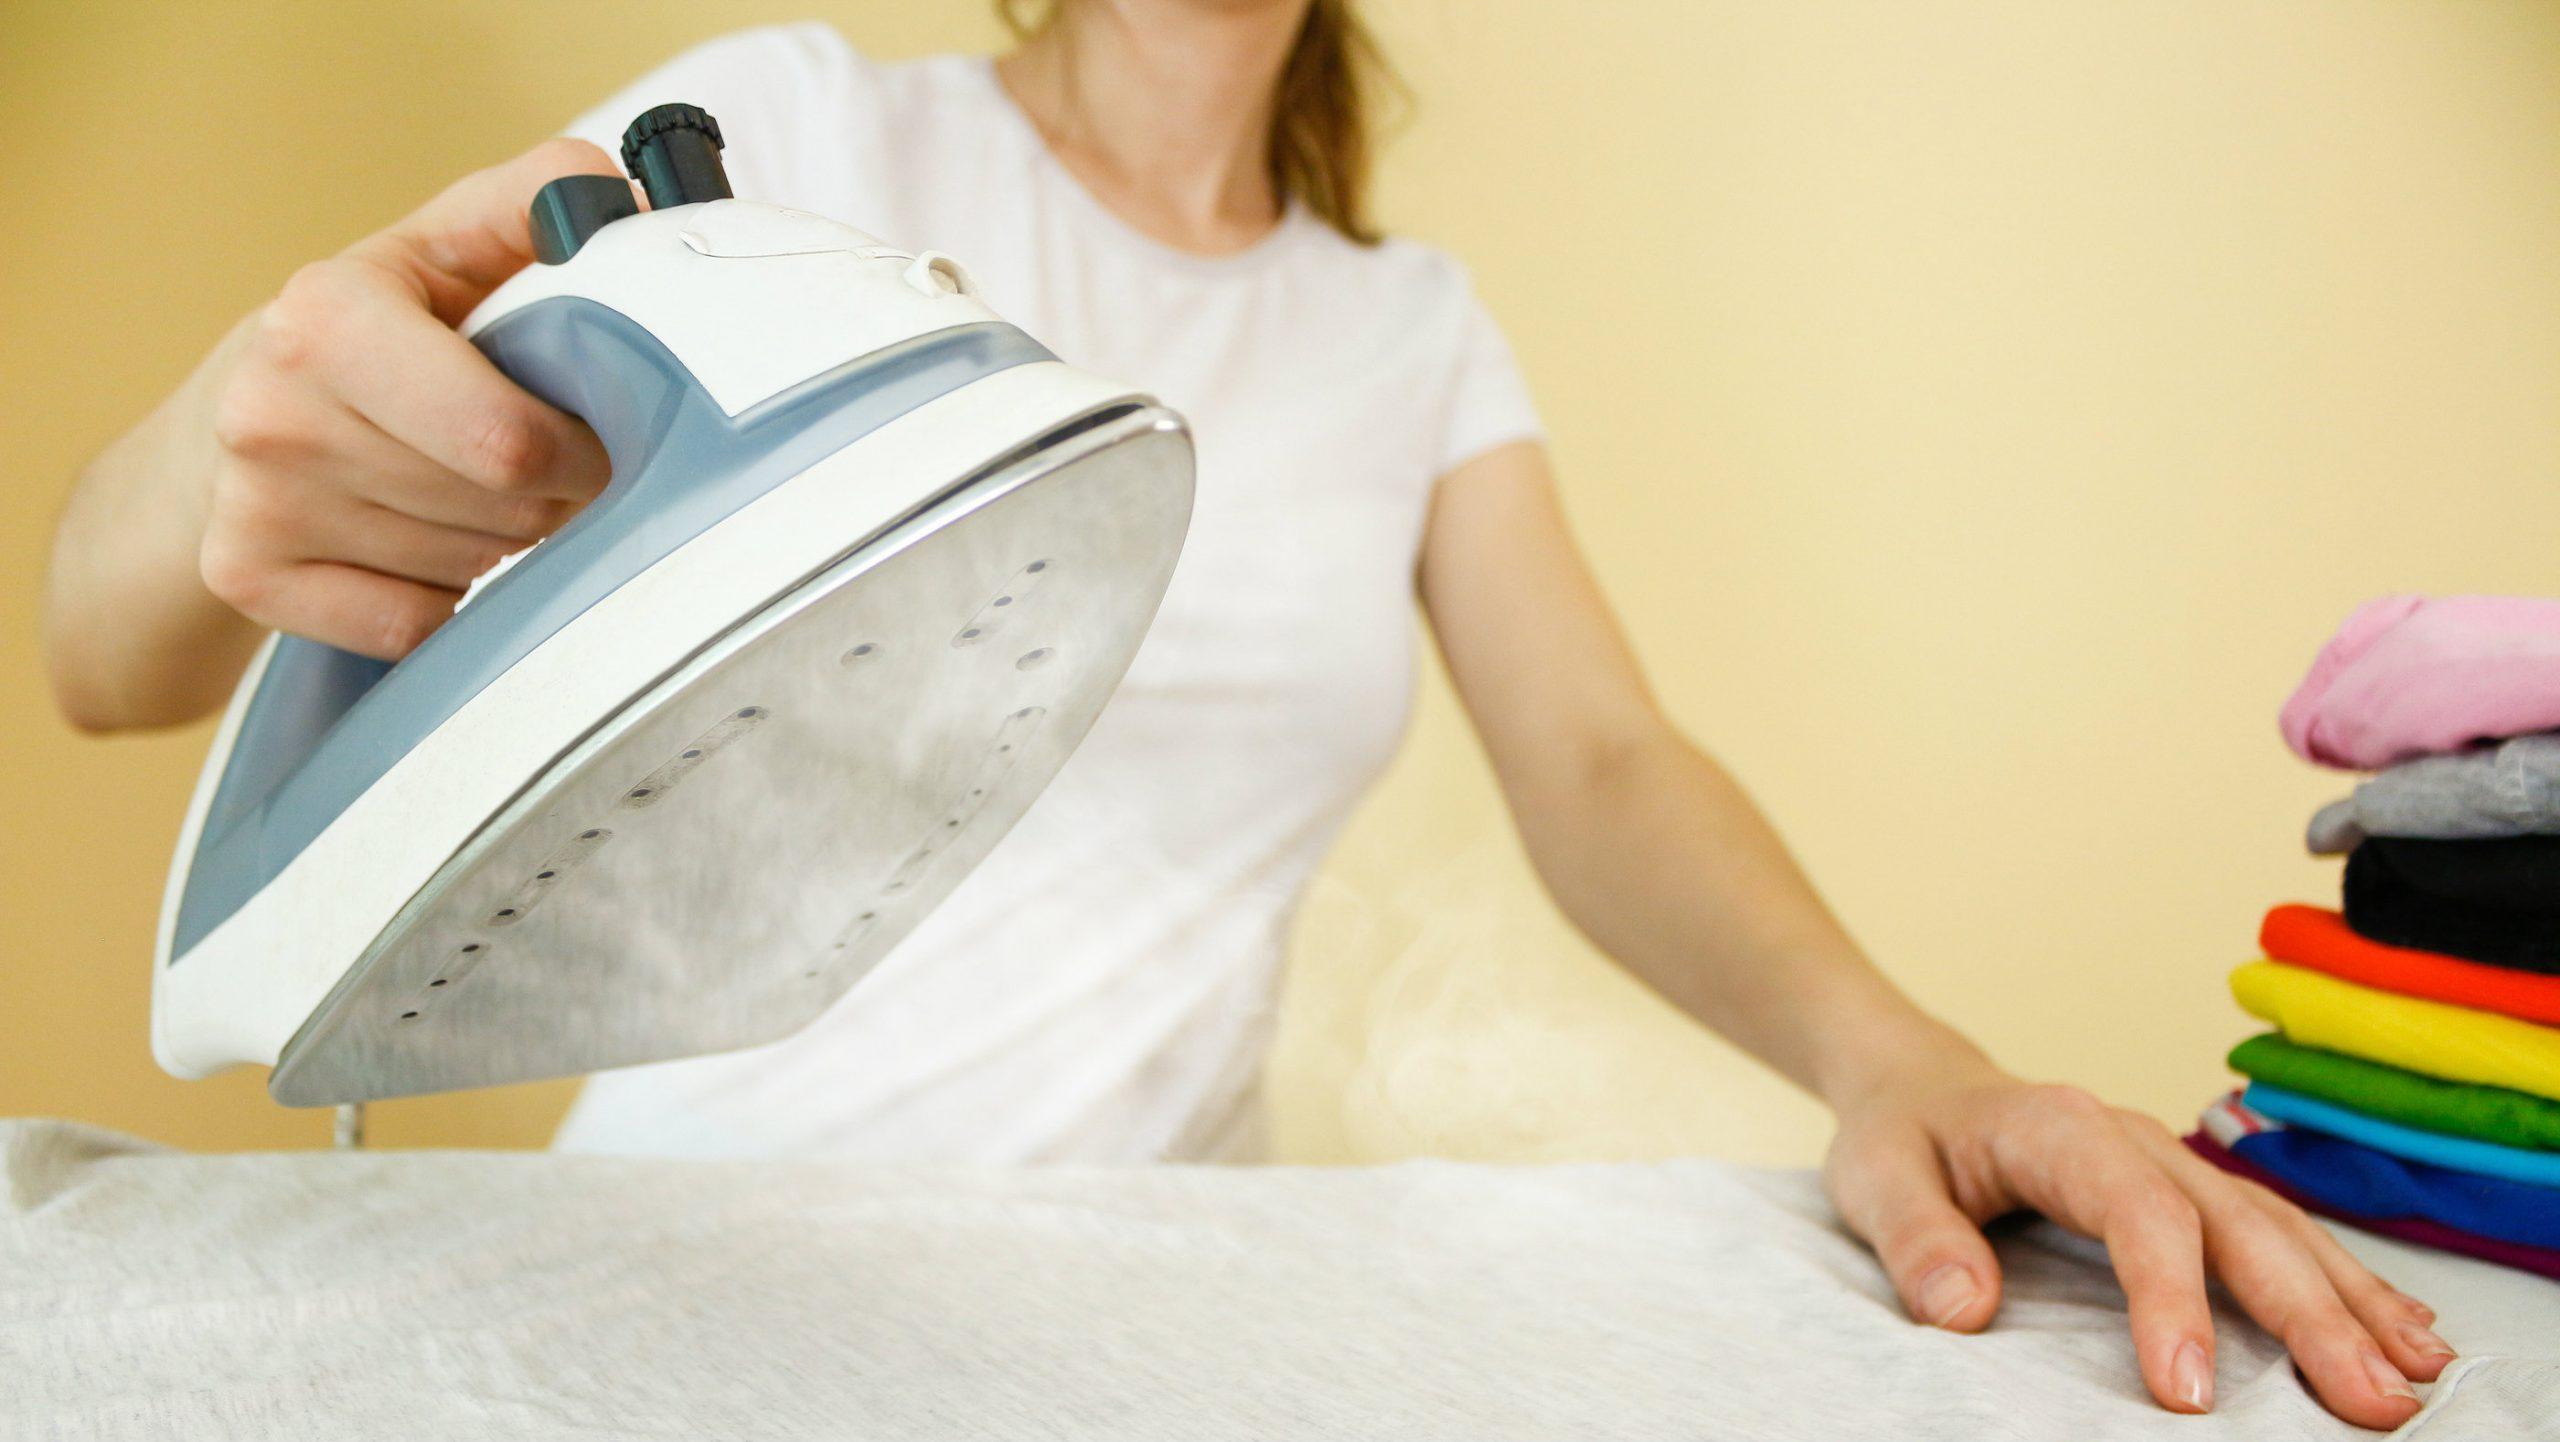 How to Iron Clothes: 4 Simple Steps